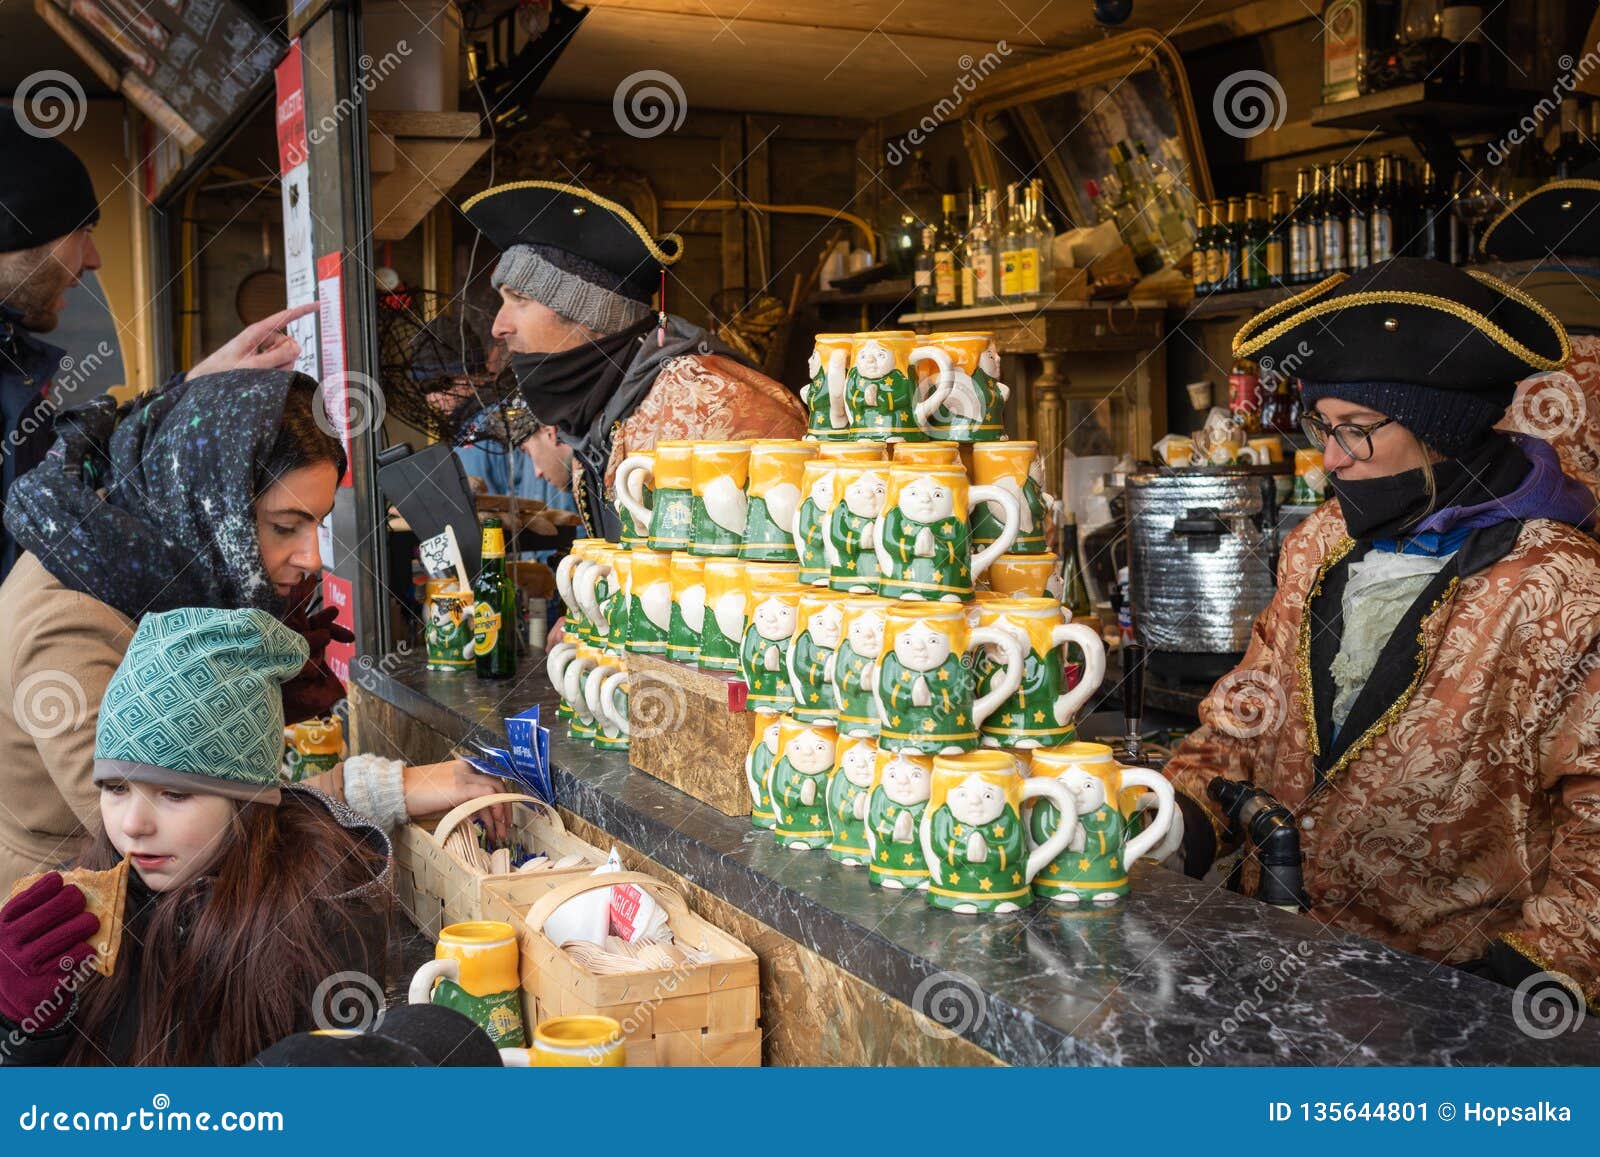 People Buying Hot Drinks at Christmas Market in Vienna Editorial Photo -  Image of austria, background: 135644801